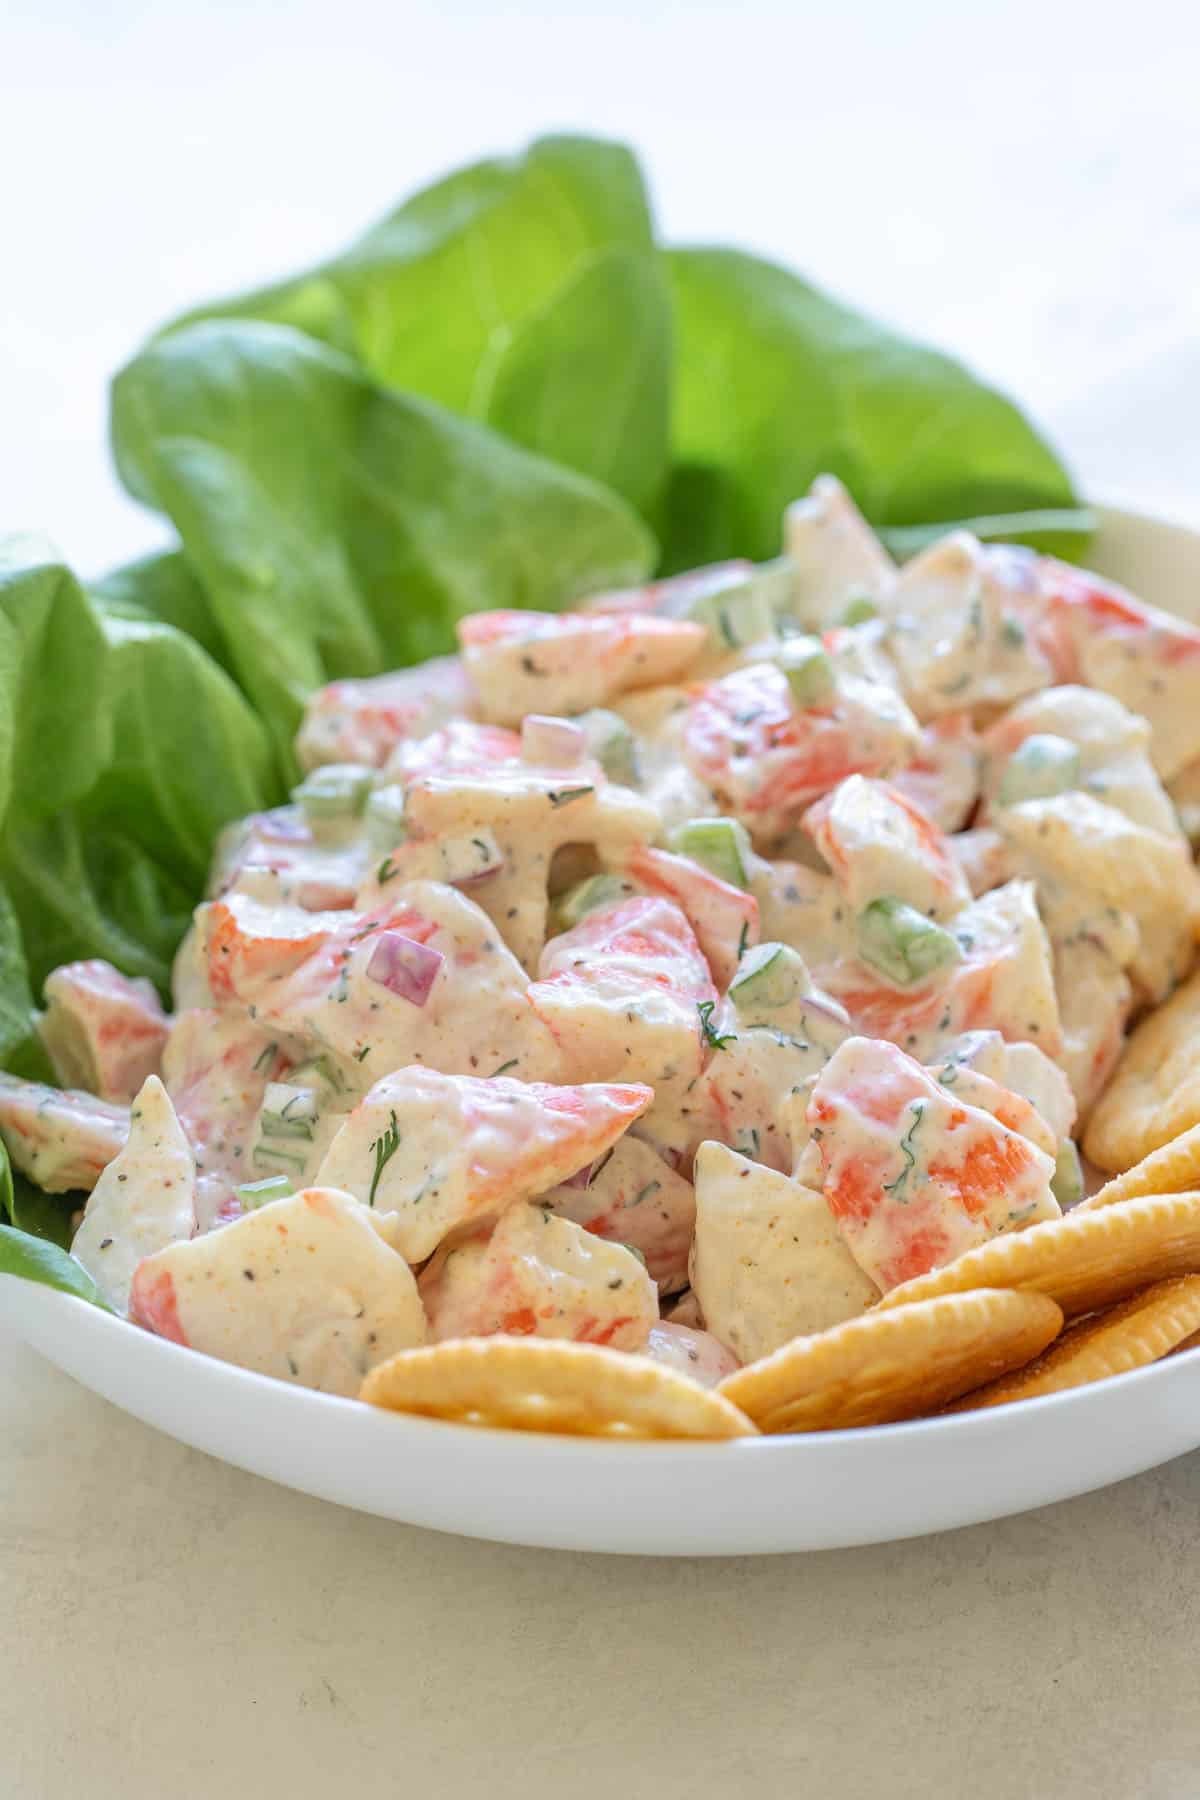 Front closeup view of imitation crab salad in a bowl with lettuce and crackers.